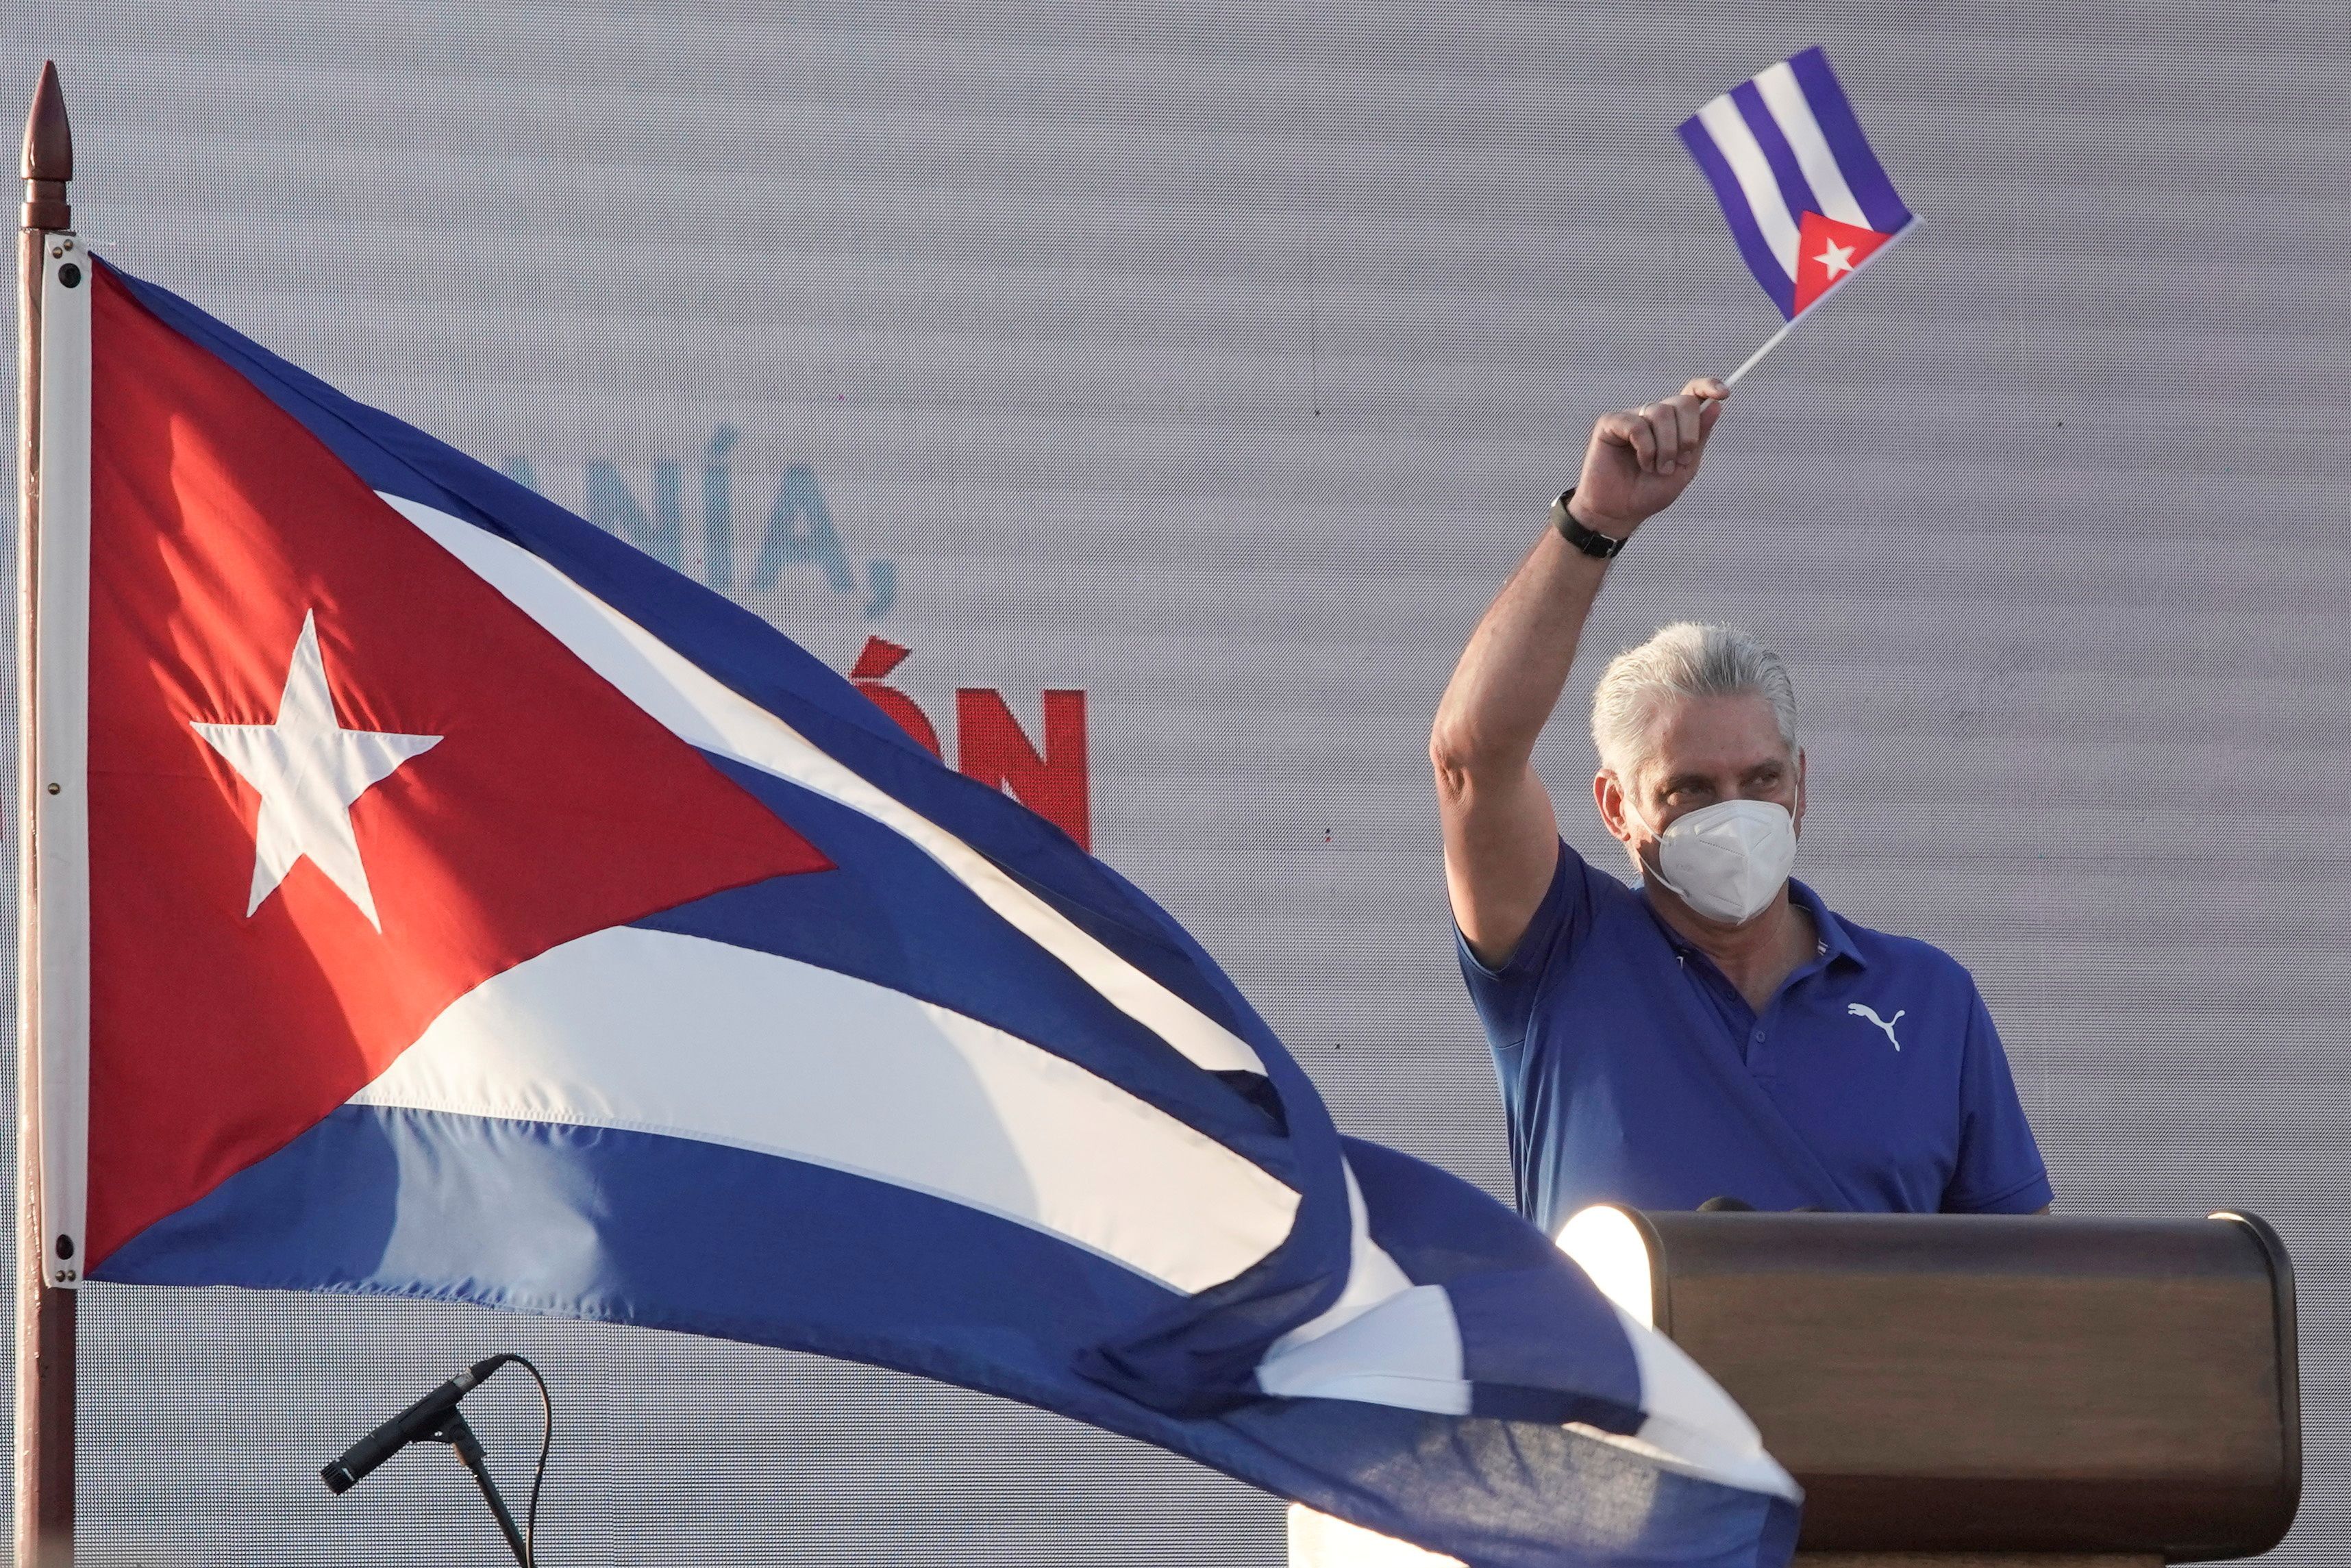 Cuba's President Miguel Diaz-Canel delivers a speech during a rally in Havana